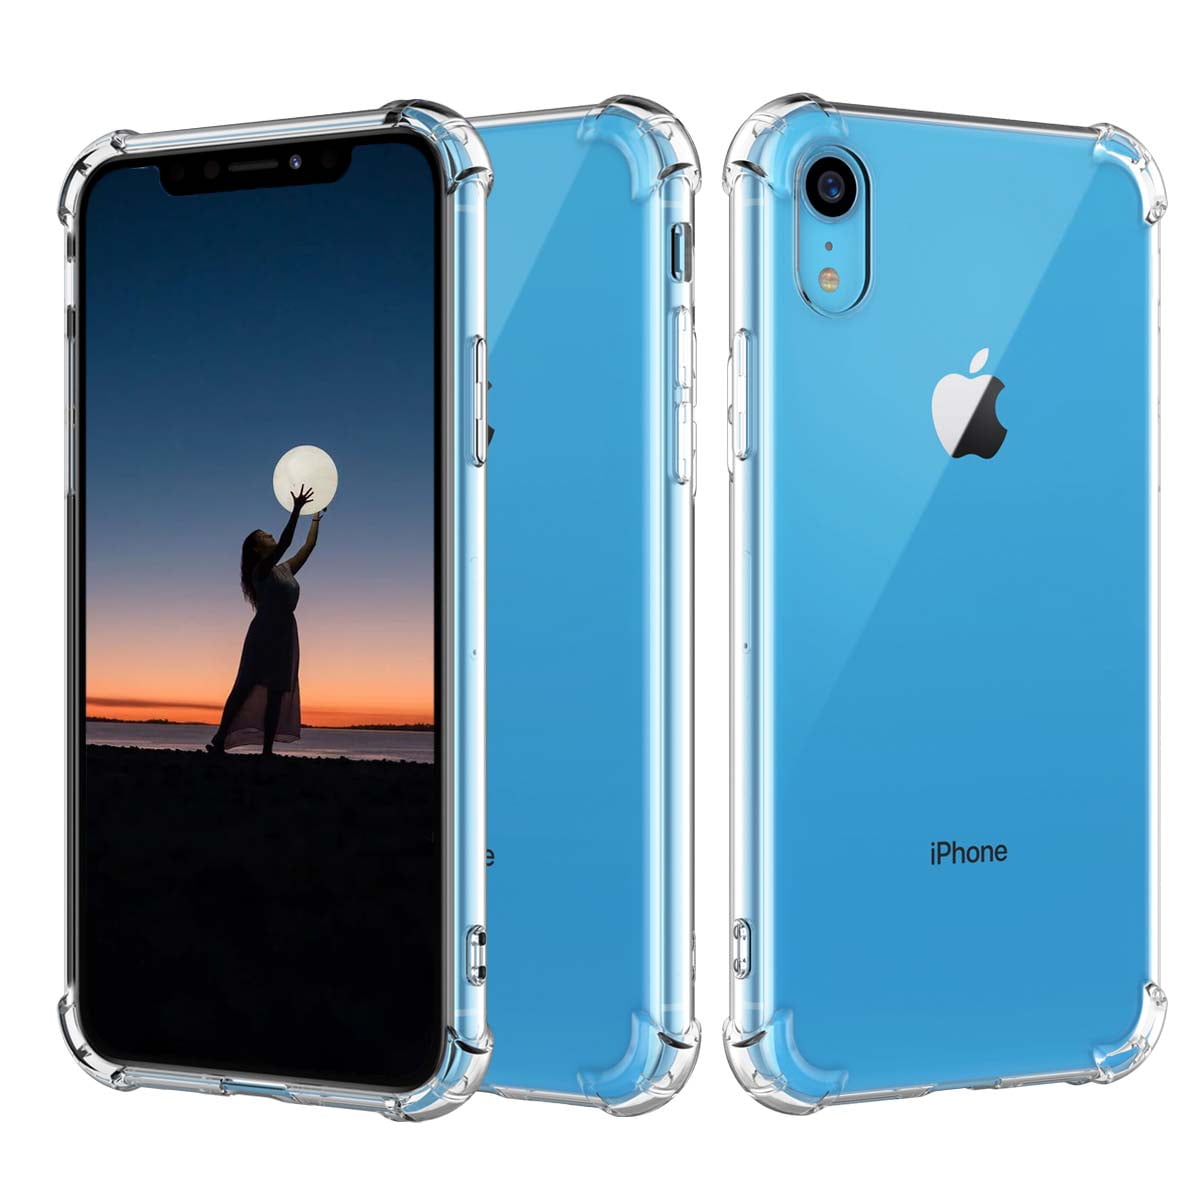 Compatible iPhone XR Case with Floral Bumper Soft Protective Slim Silicone Cover Case for iPhone XR 